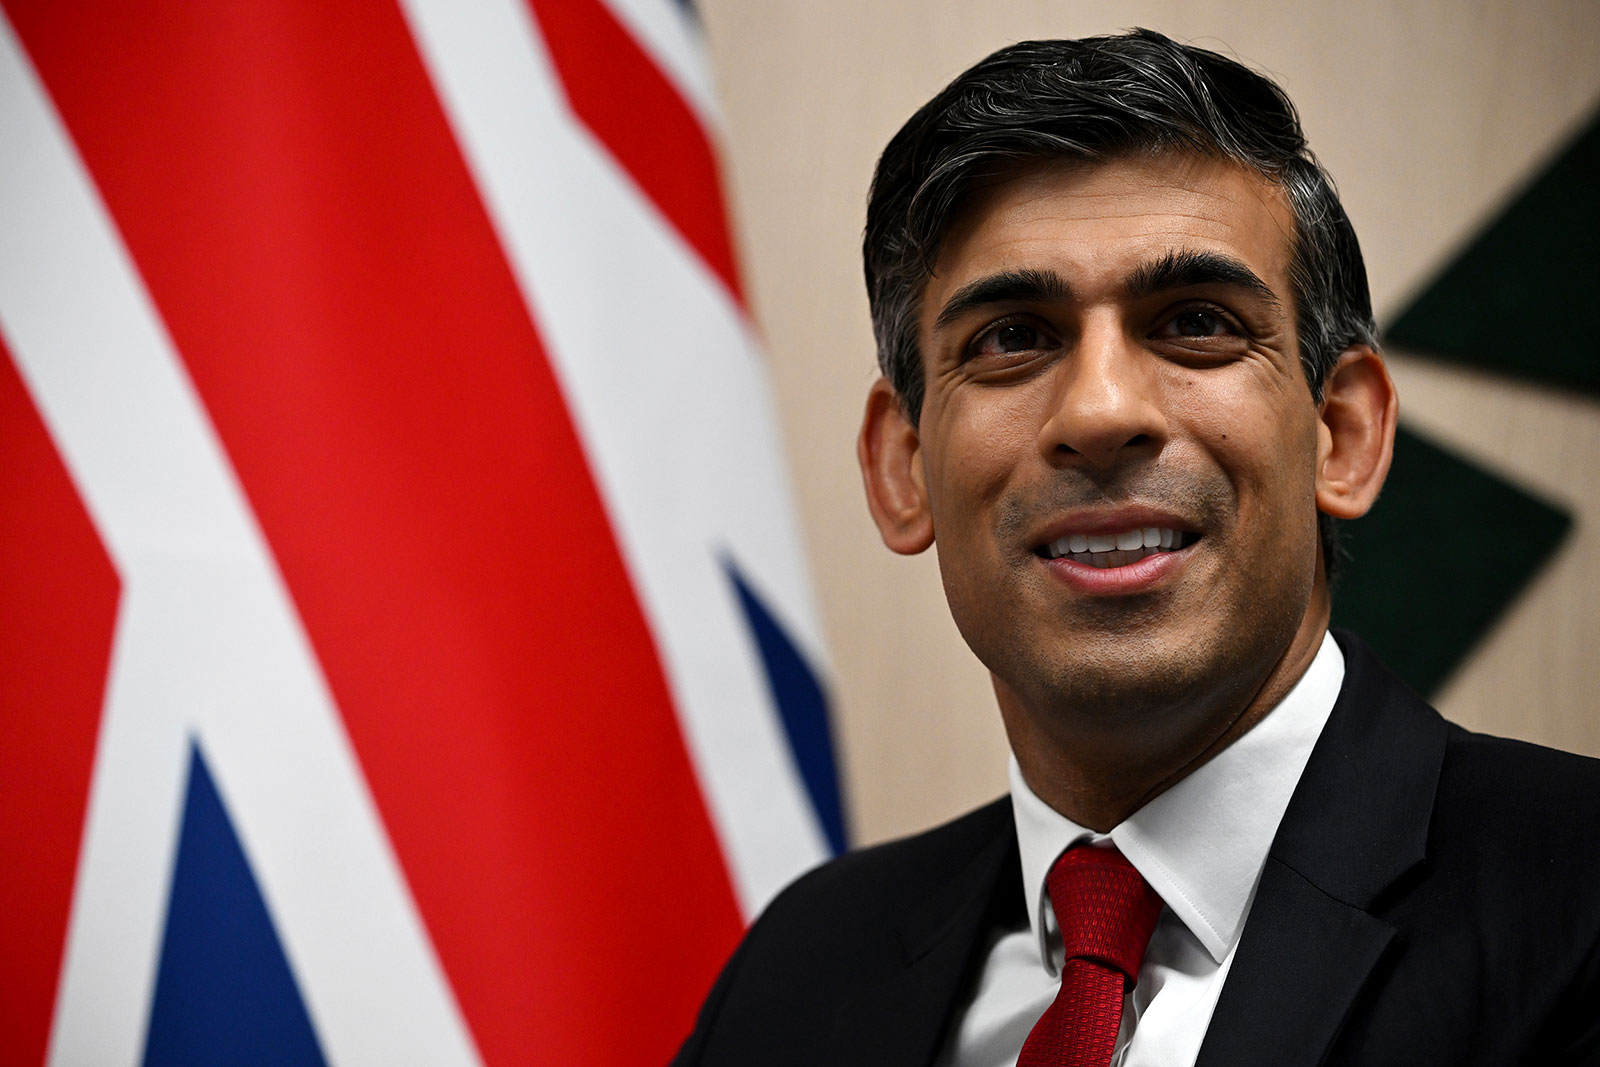 British Prime Minister Rishi Sunak is seen during the NATO summit in Vilnius, Lithuania, on July 11